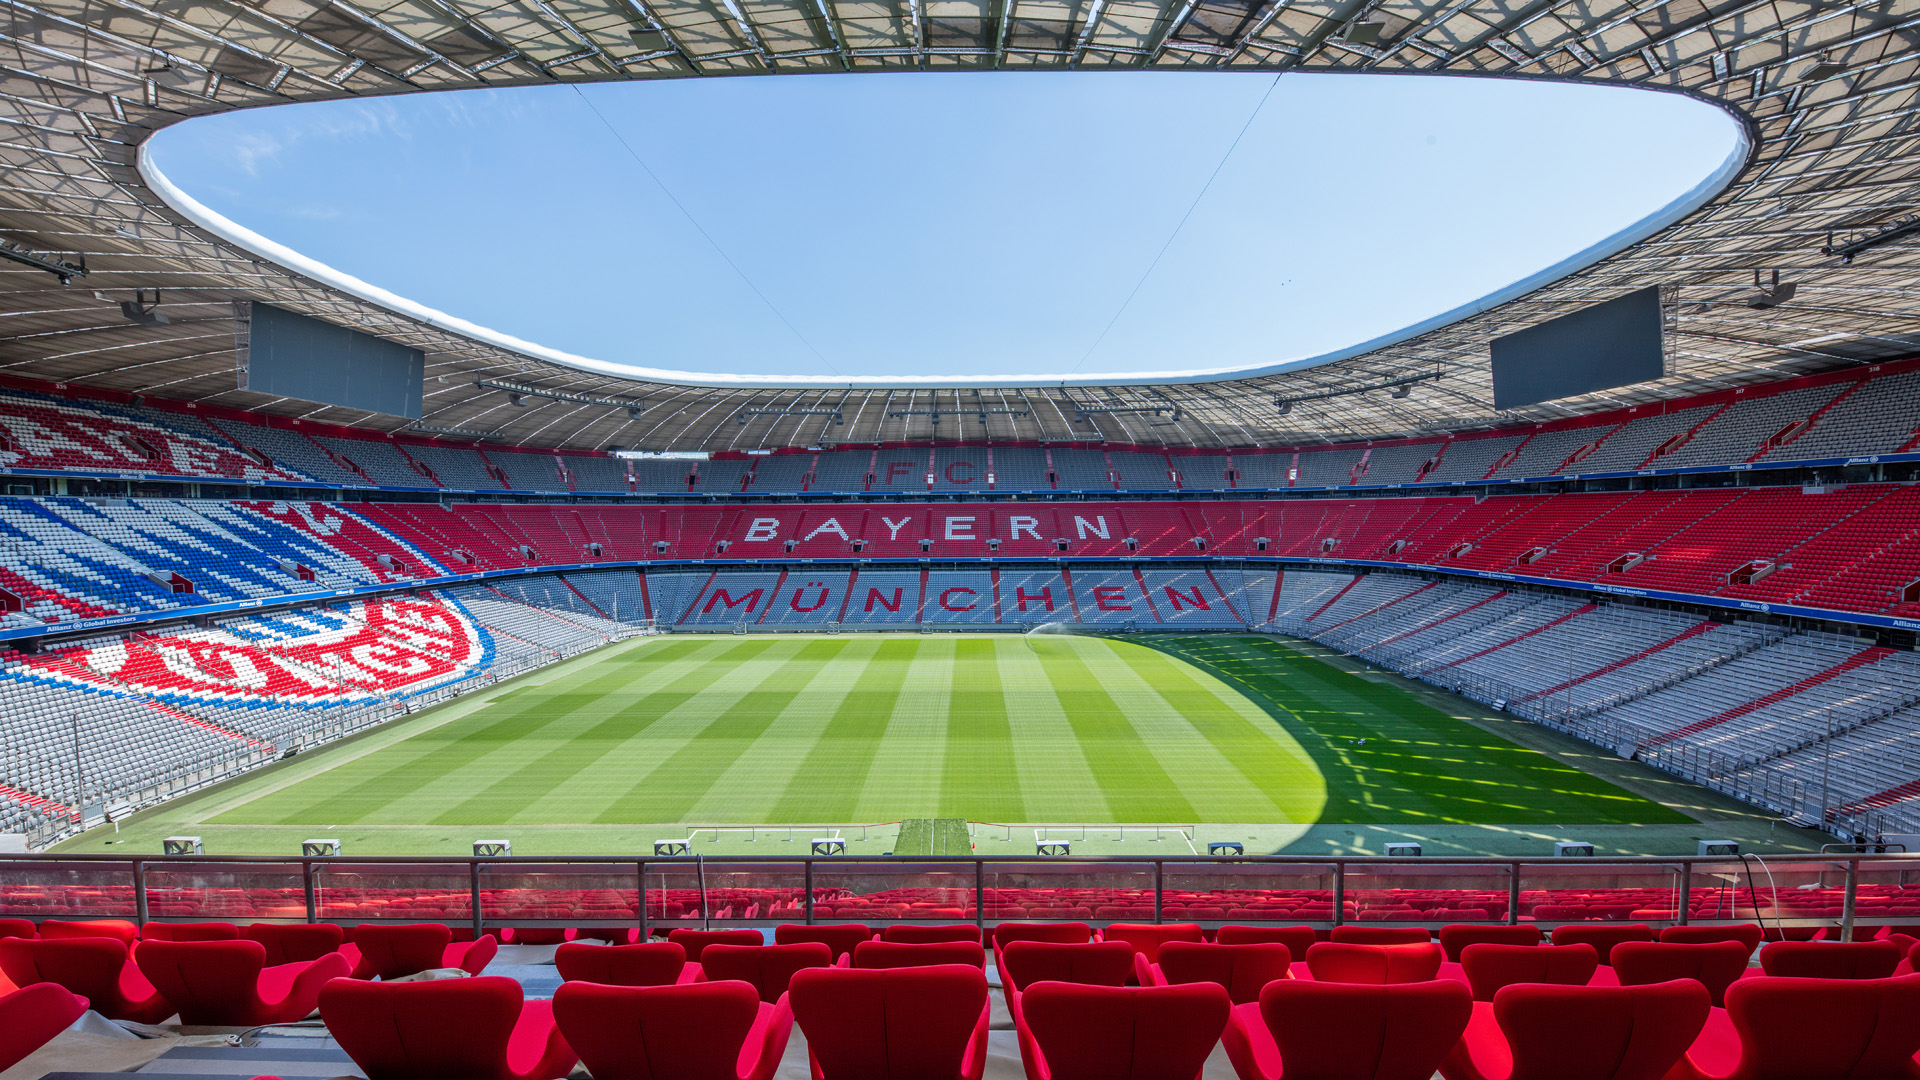 Bayern Munich vs Barcelona: Barcelona handed a boost for their crucial UCL game against Bayern as no fans will be allowed in the stadium